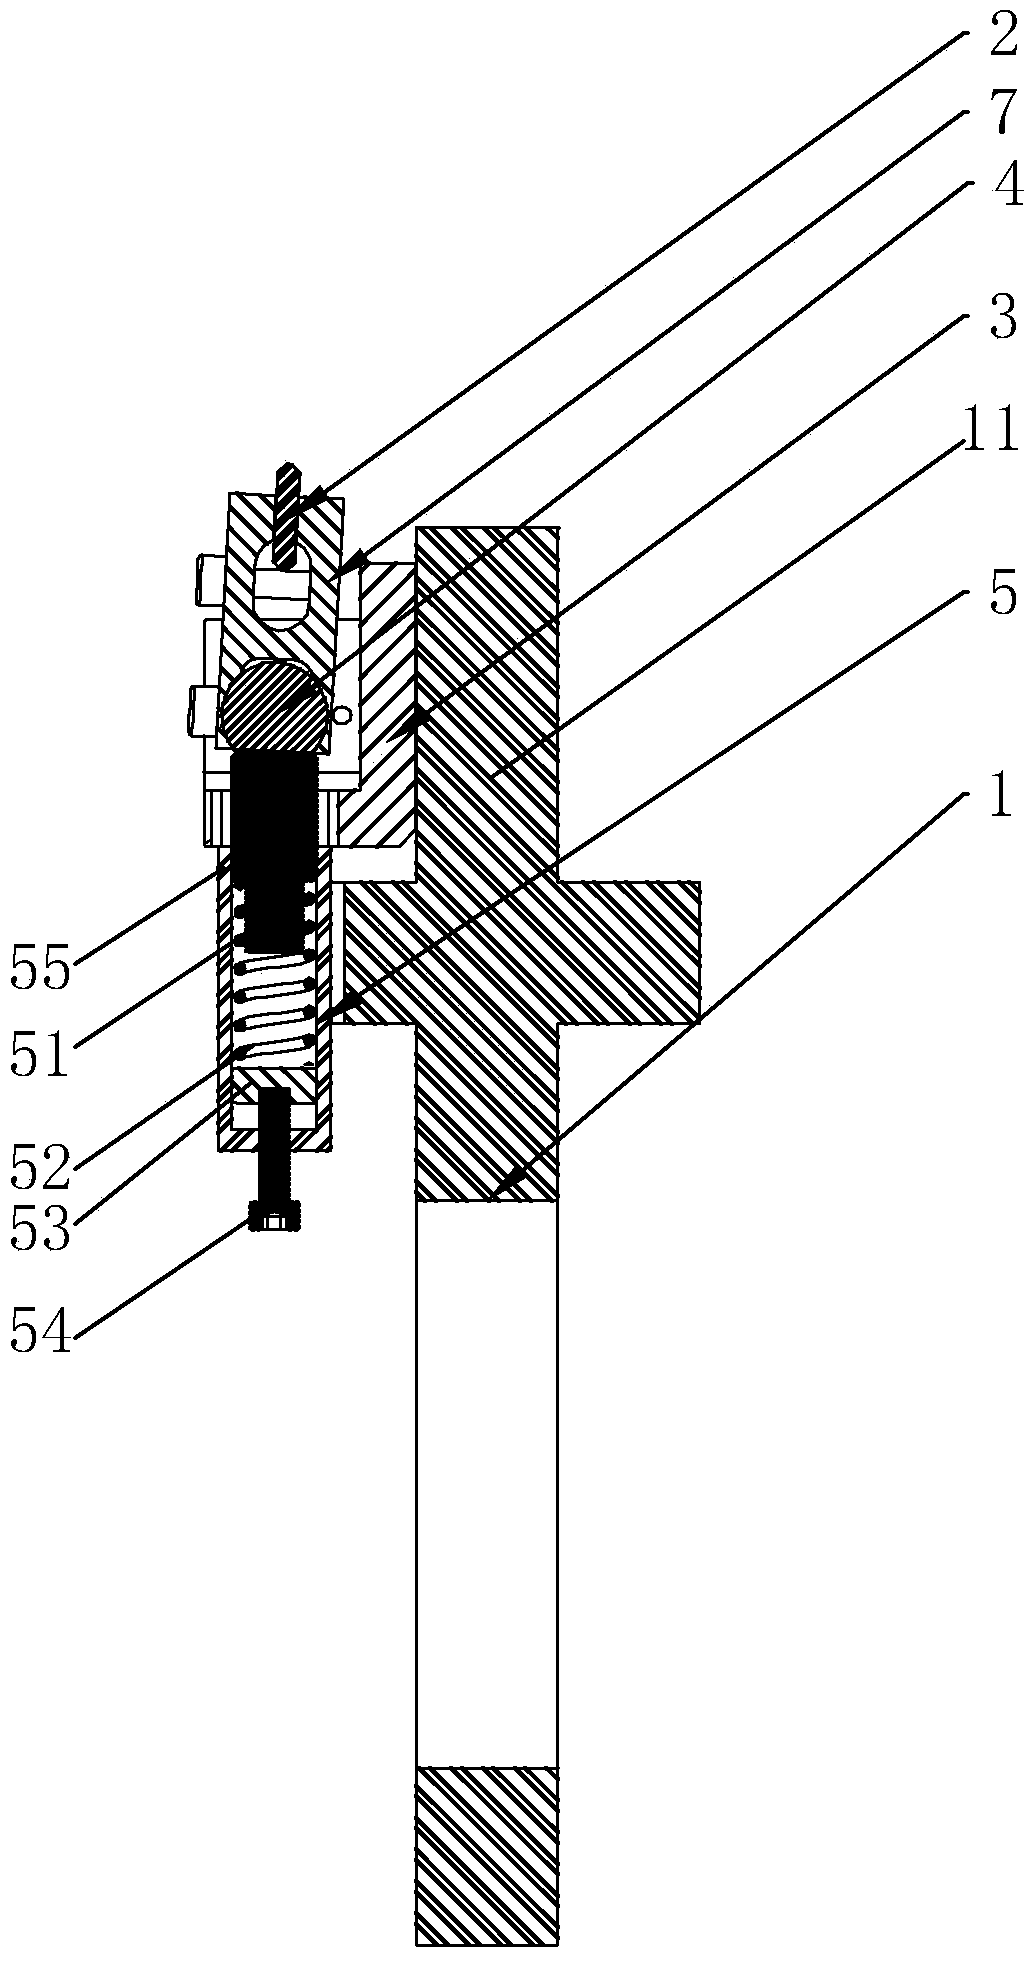 A vertical force floating powder coating scraper device for metal additive manufacturing